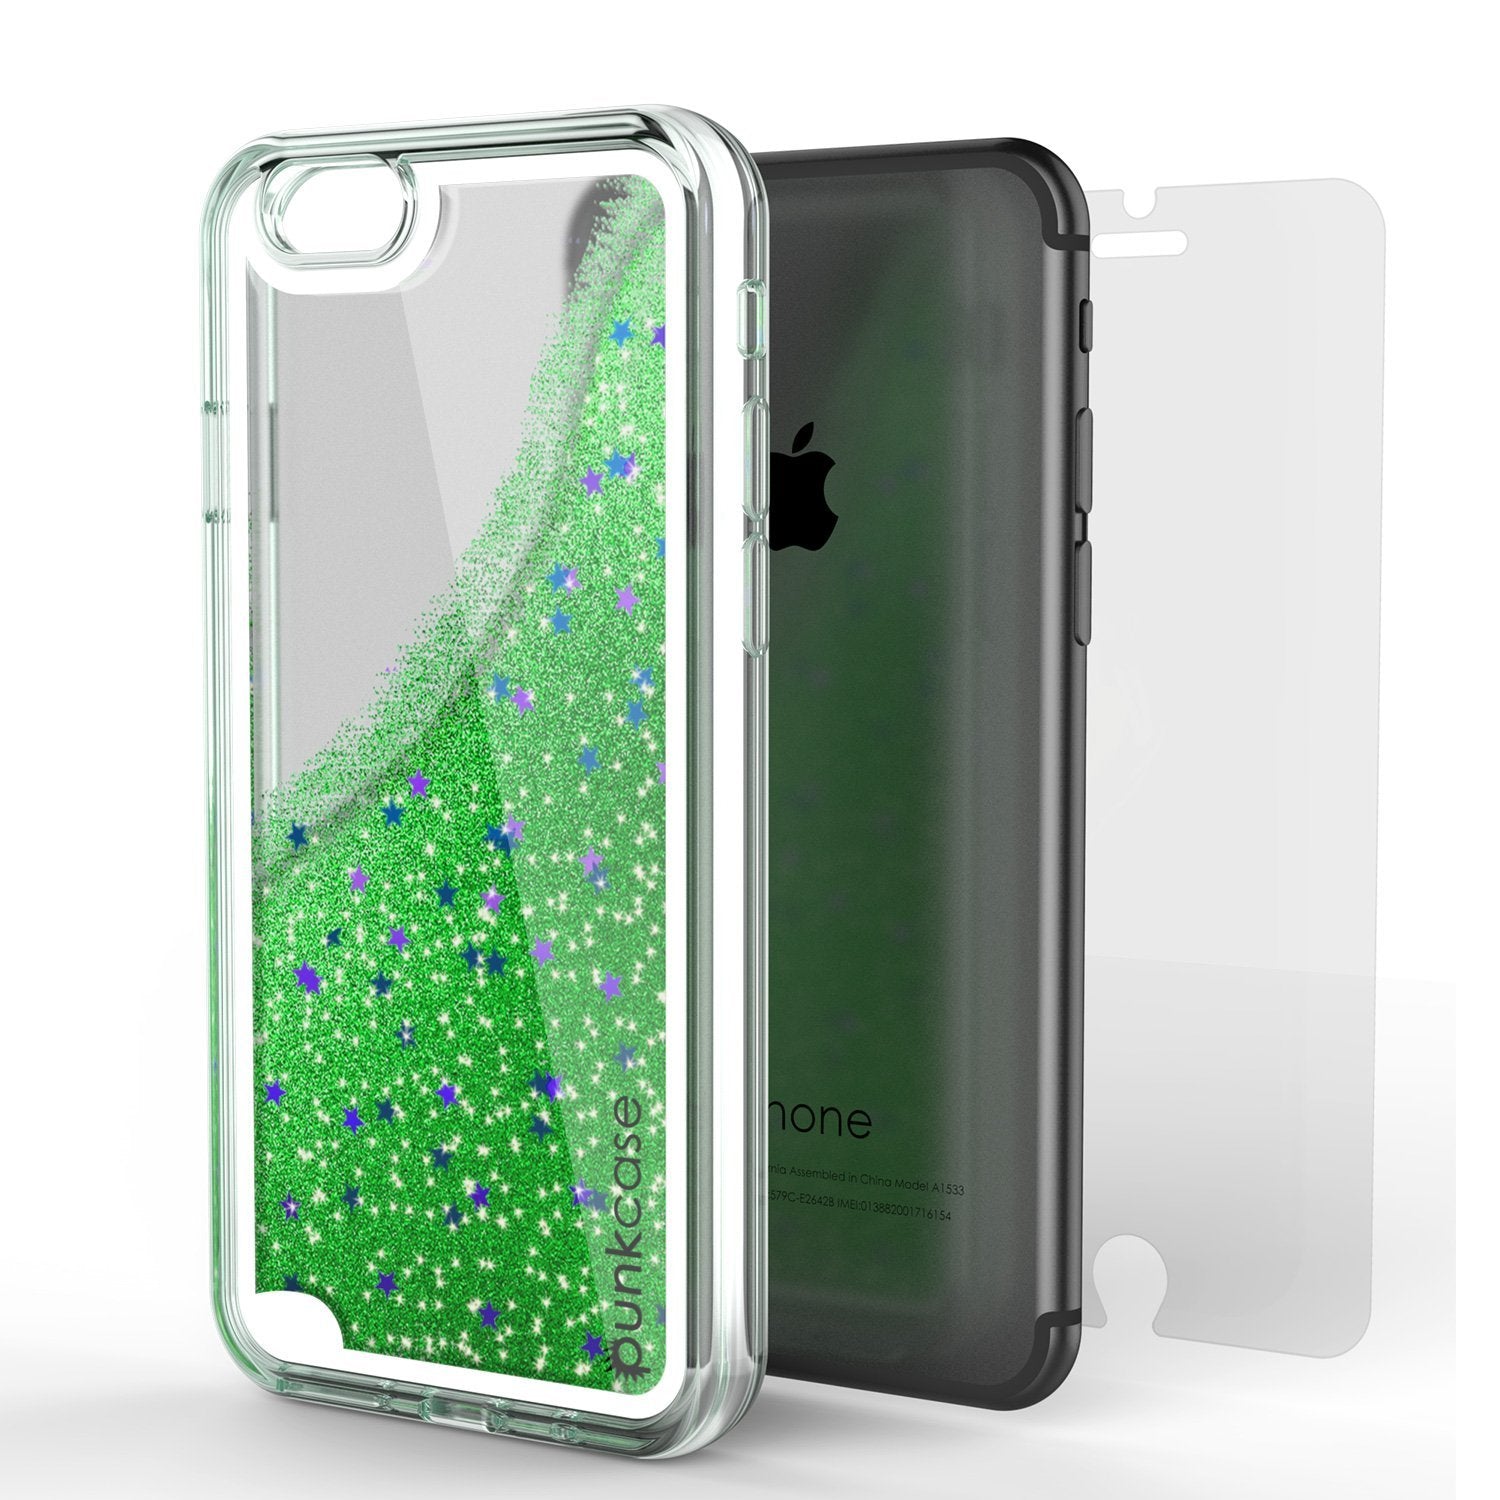 iPhone 8 Case, PunkCase LIQUID Green Series, Protective Dual Layer Floating Glitter Cover